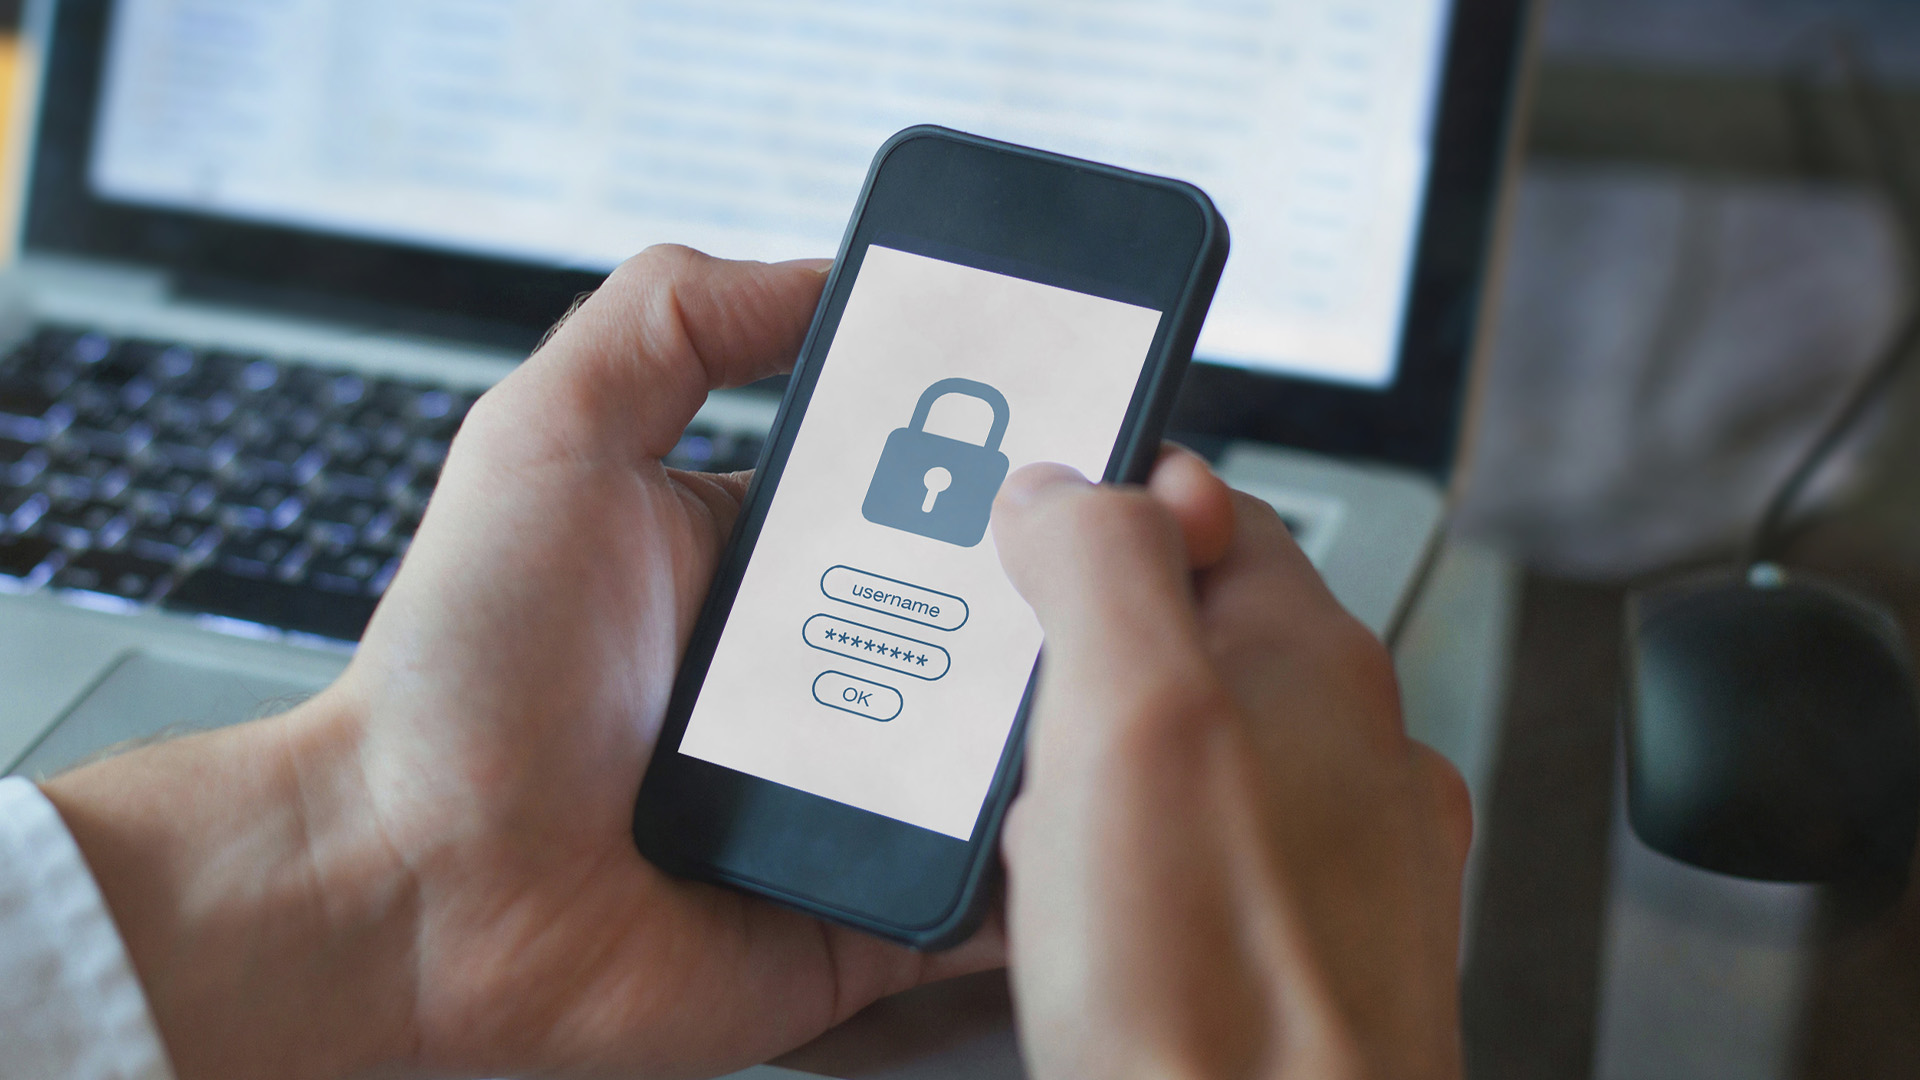 Protect Your Identity Now: Learn the Password ‘Phrase Trick’ in Seconds for Android and iPhone Users to Prevent Identity Theft